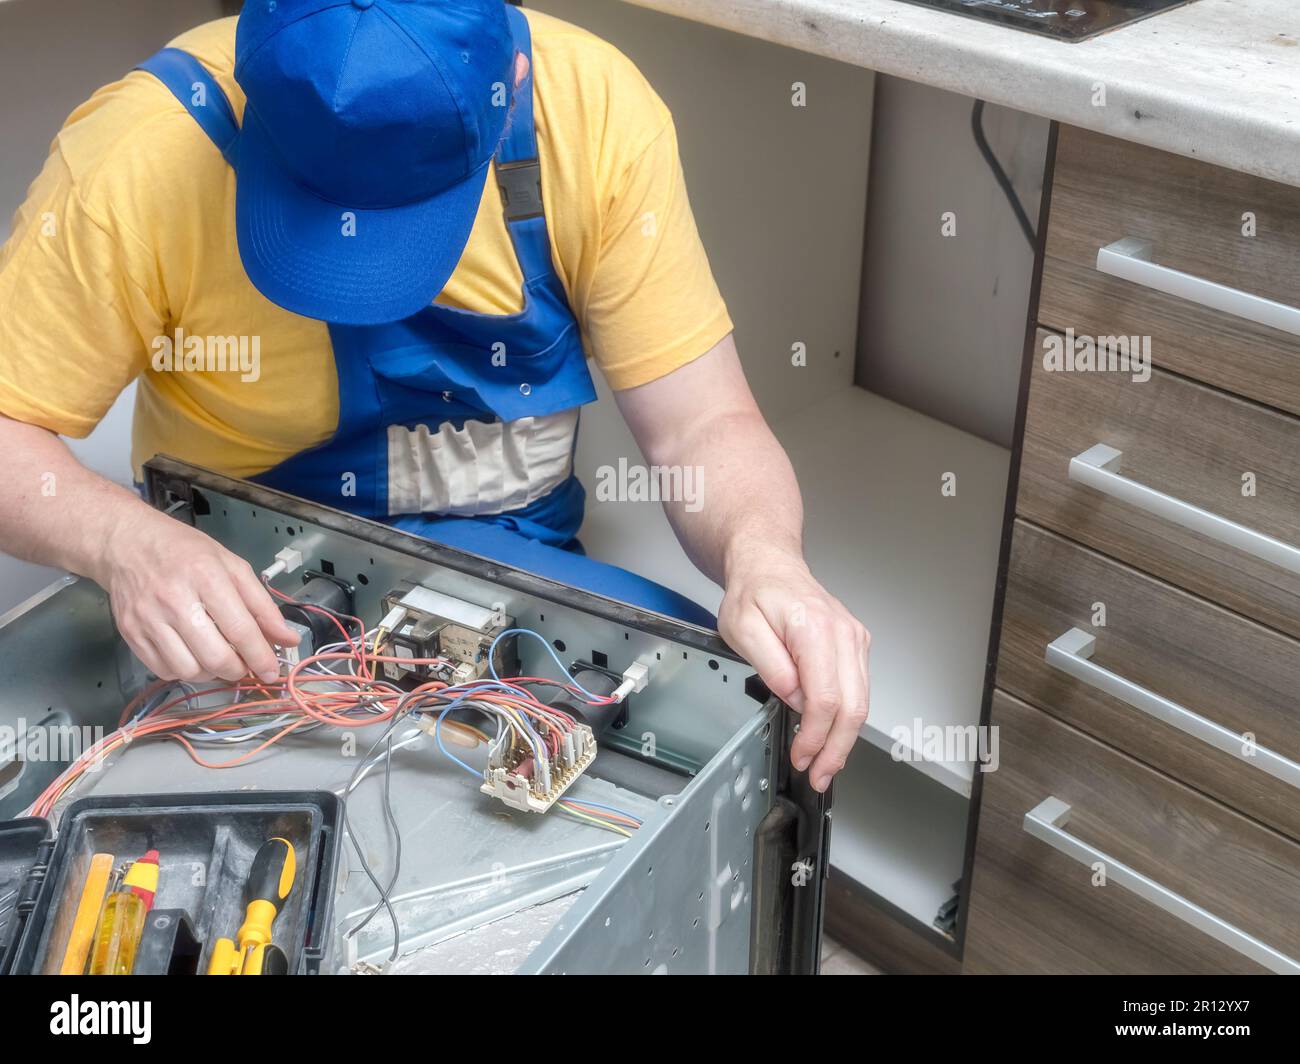 Serviceman replacing faulty part in the broken electric oven Stock Photo